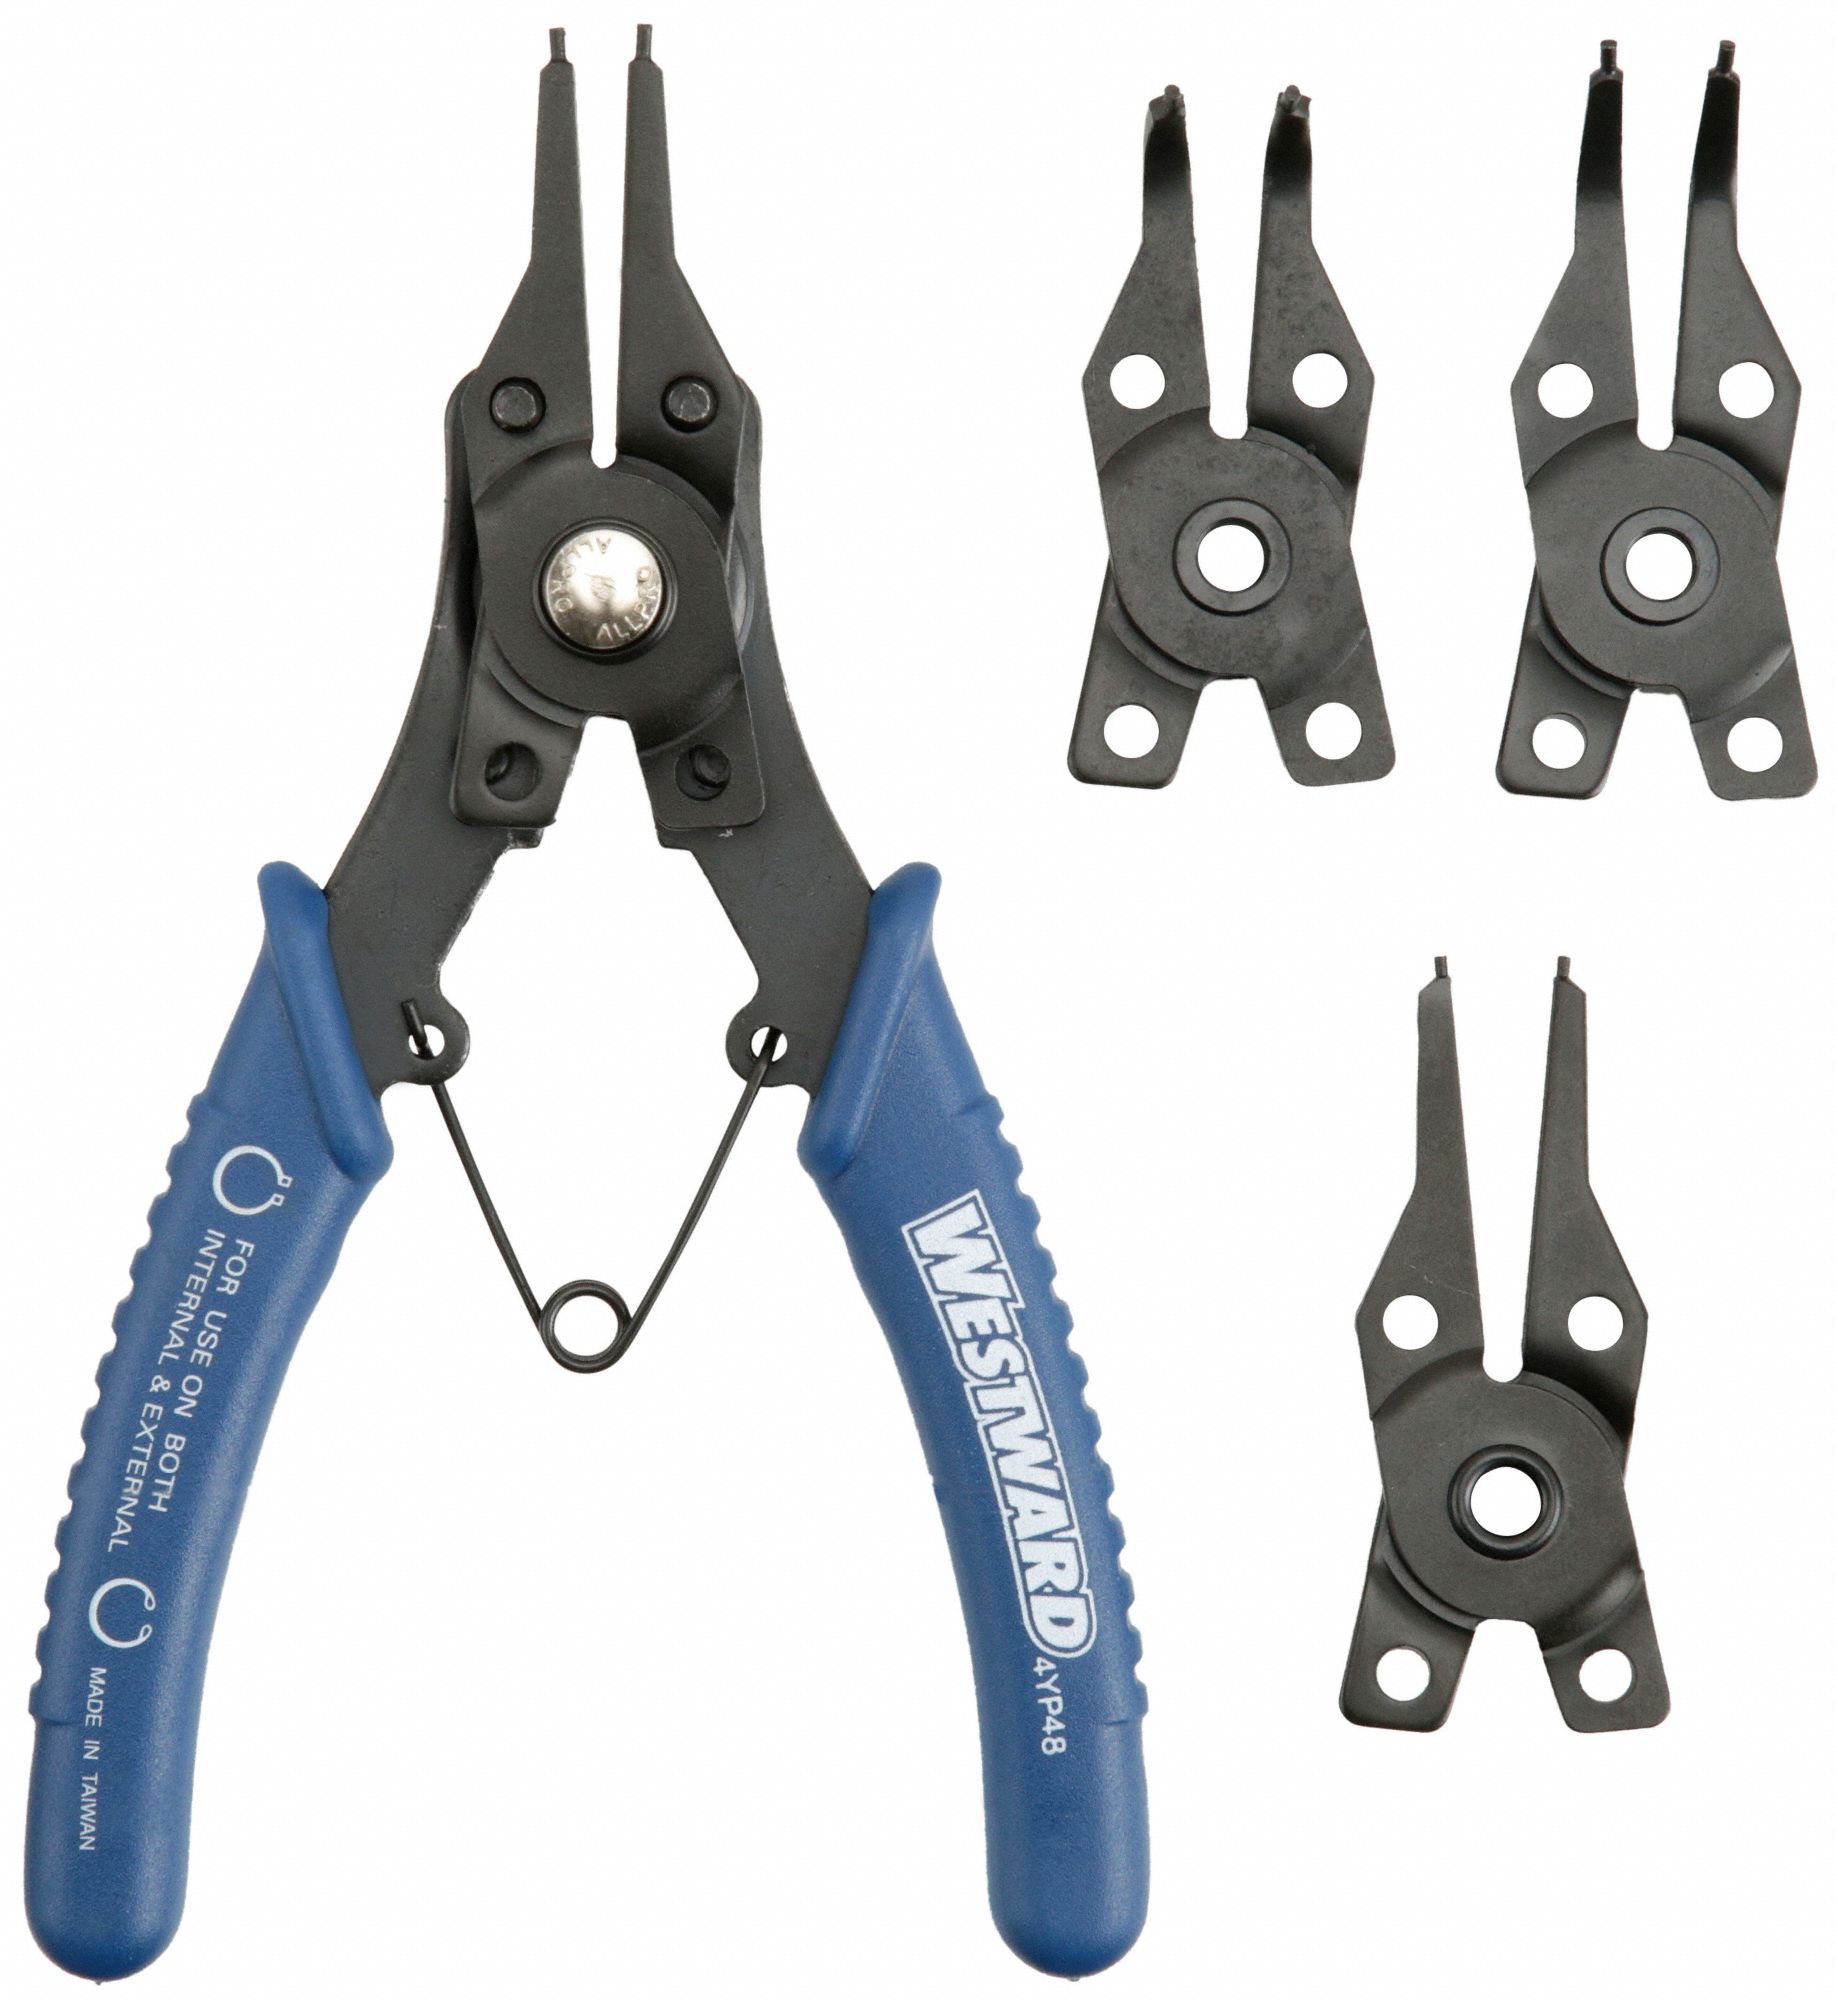 WESTWARD SNAP RING PLIERS SET - Retaining and Lock Ring Plier Sets -  WSW4YP48